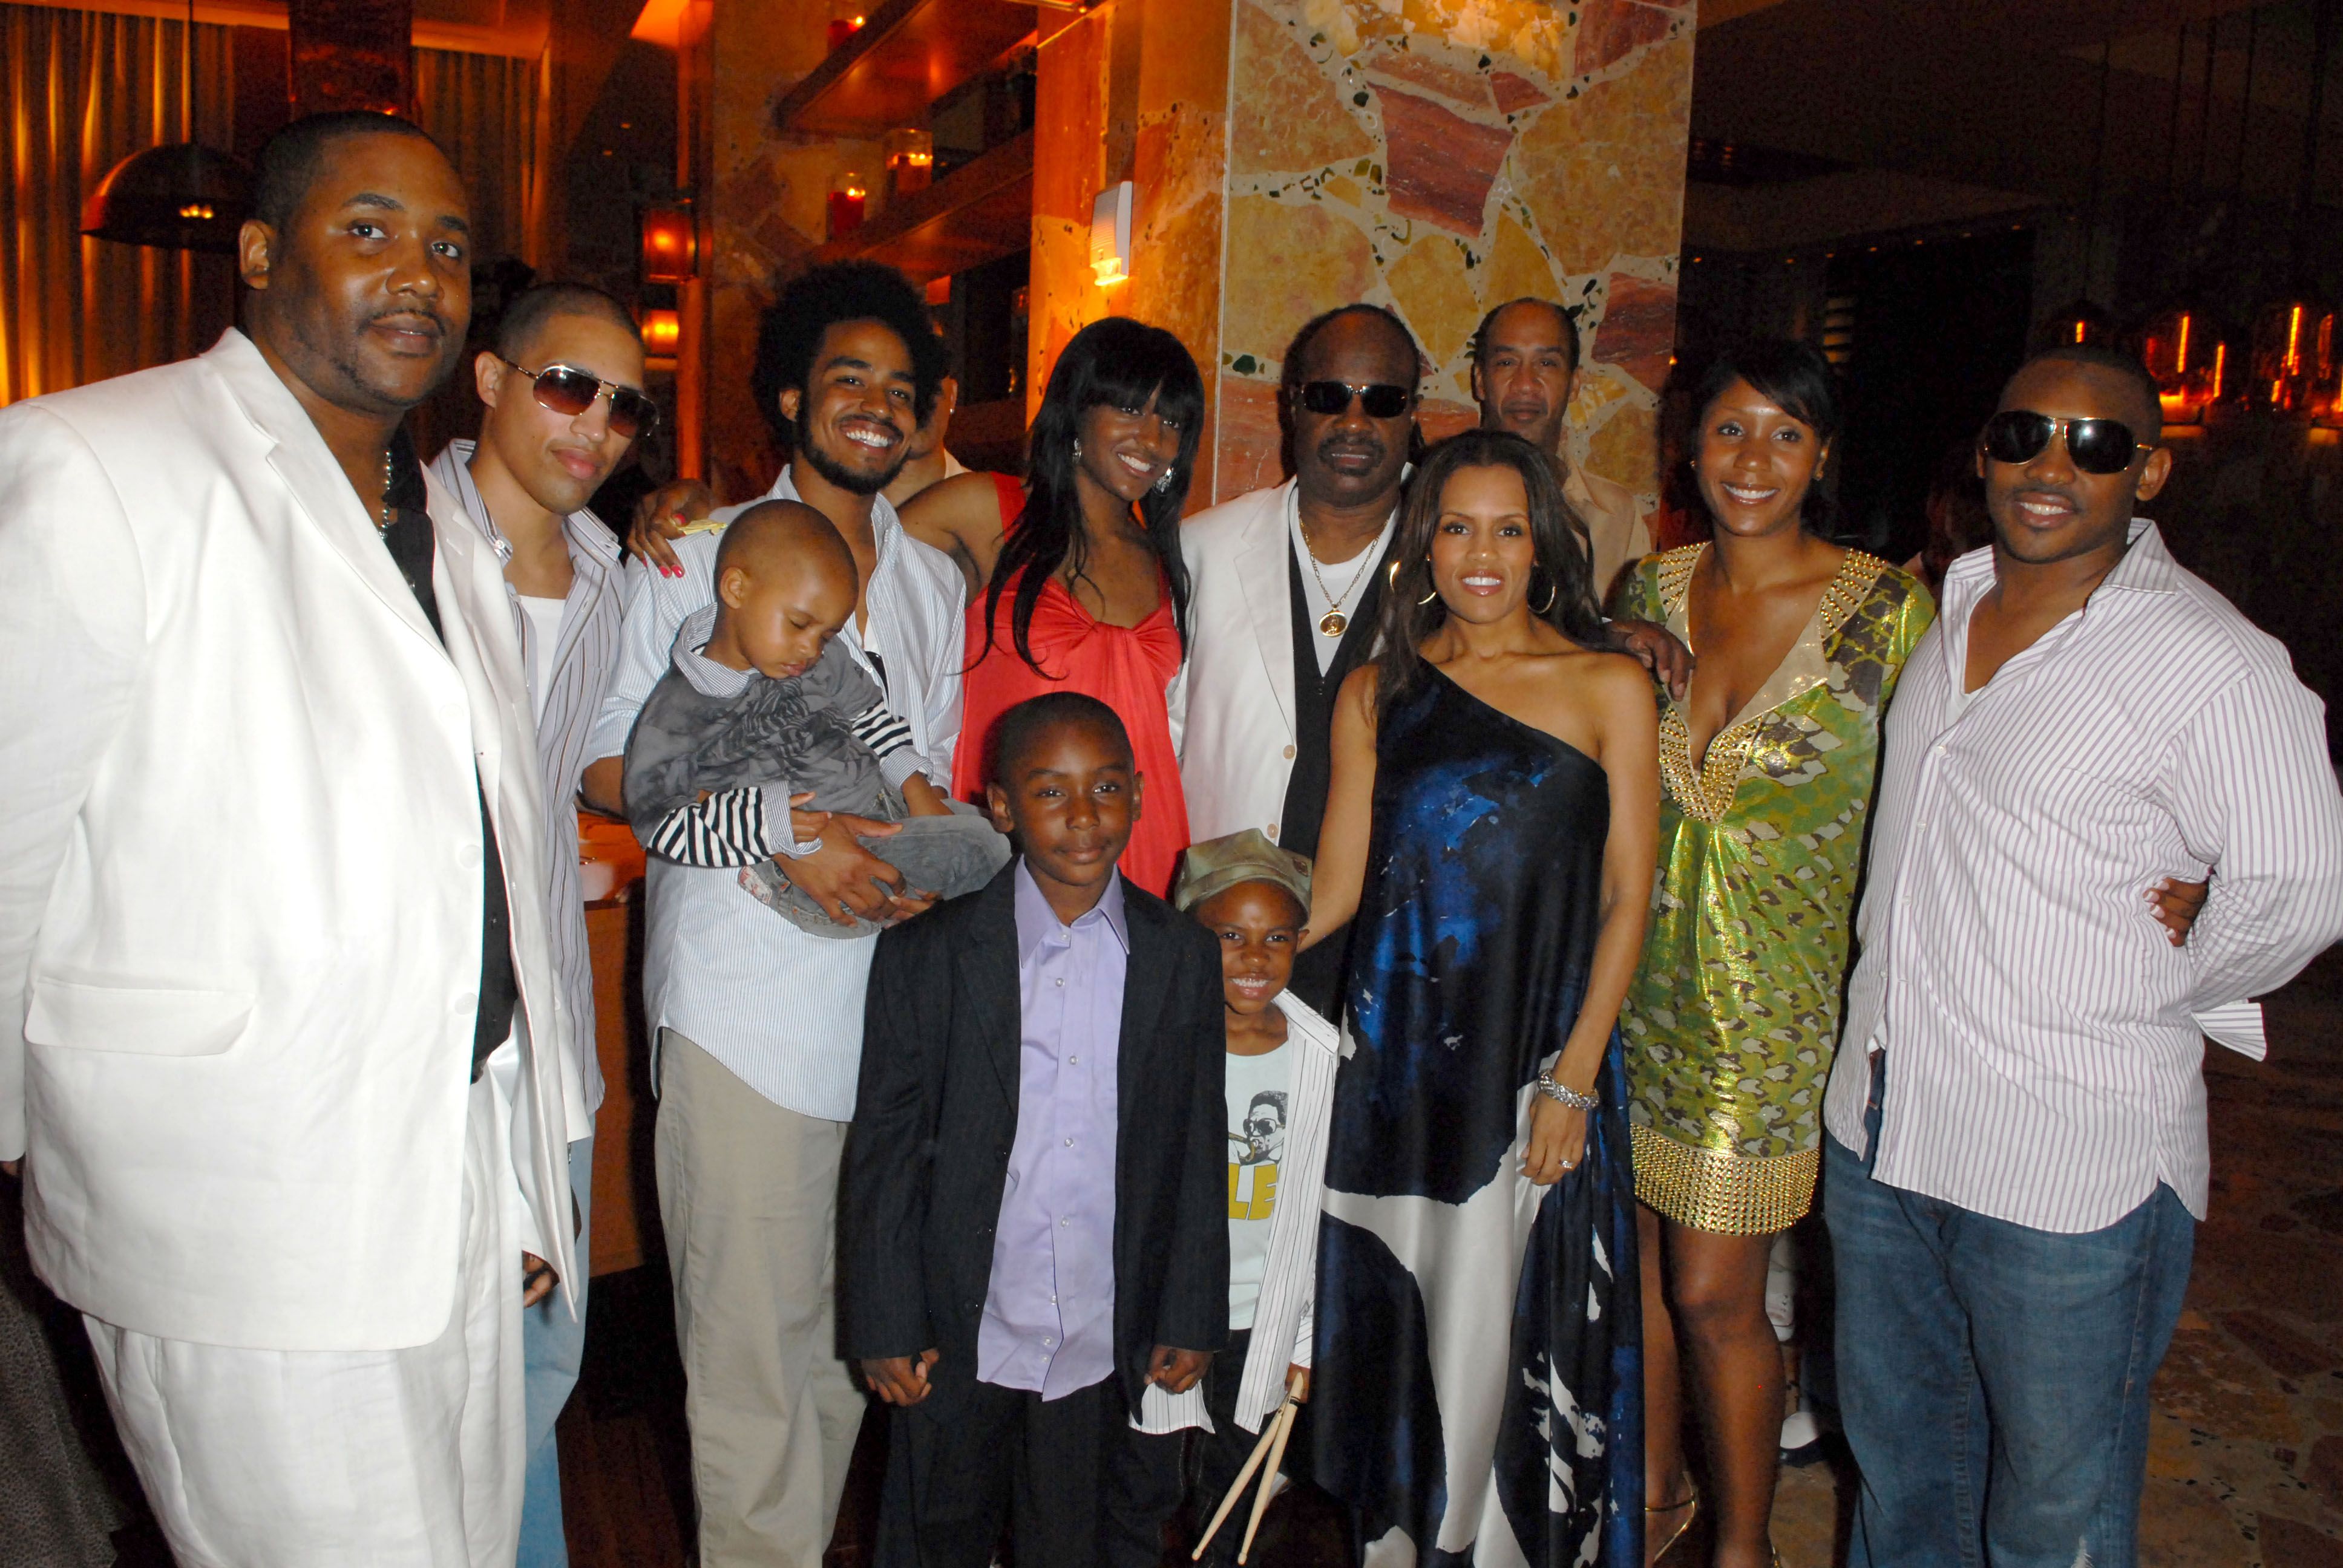 Stevie Wonder and his family attend Sol Kerzner's 57th birthday celebration at The Cove Atlantis Resort on Paradise Island. | Photo: Getty Images